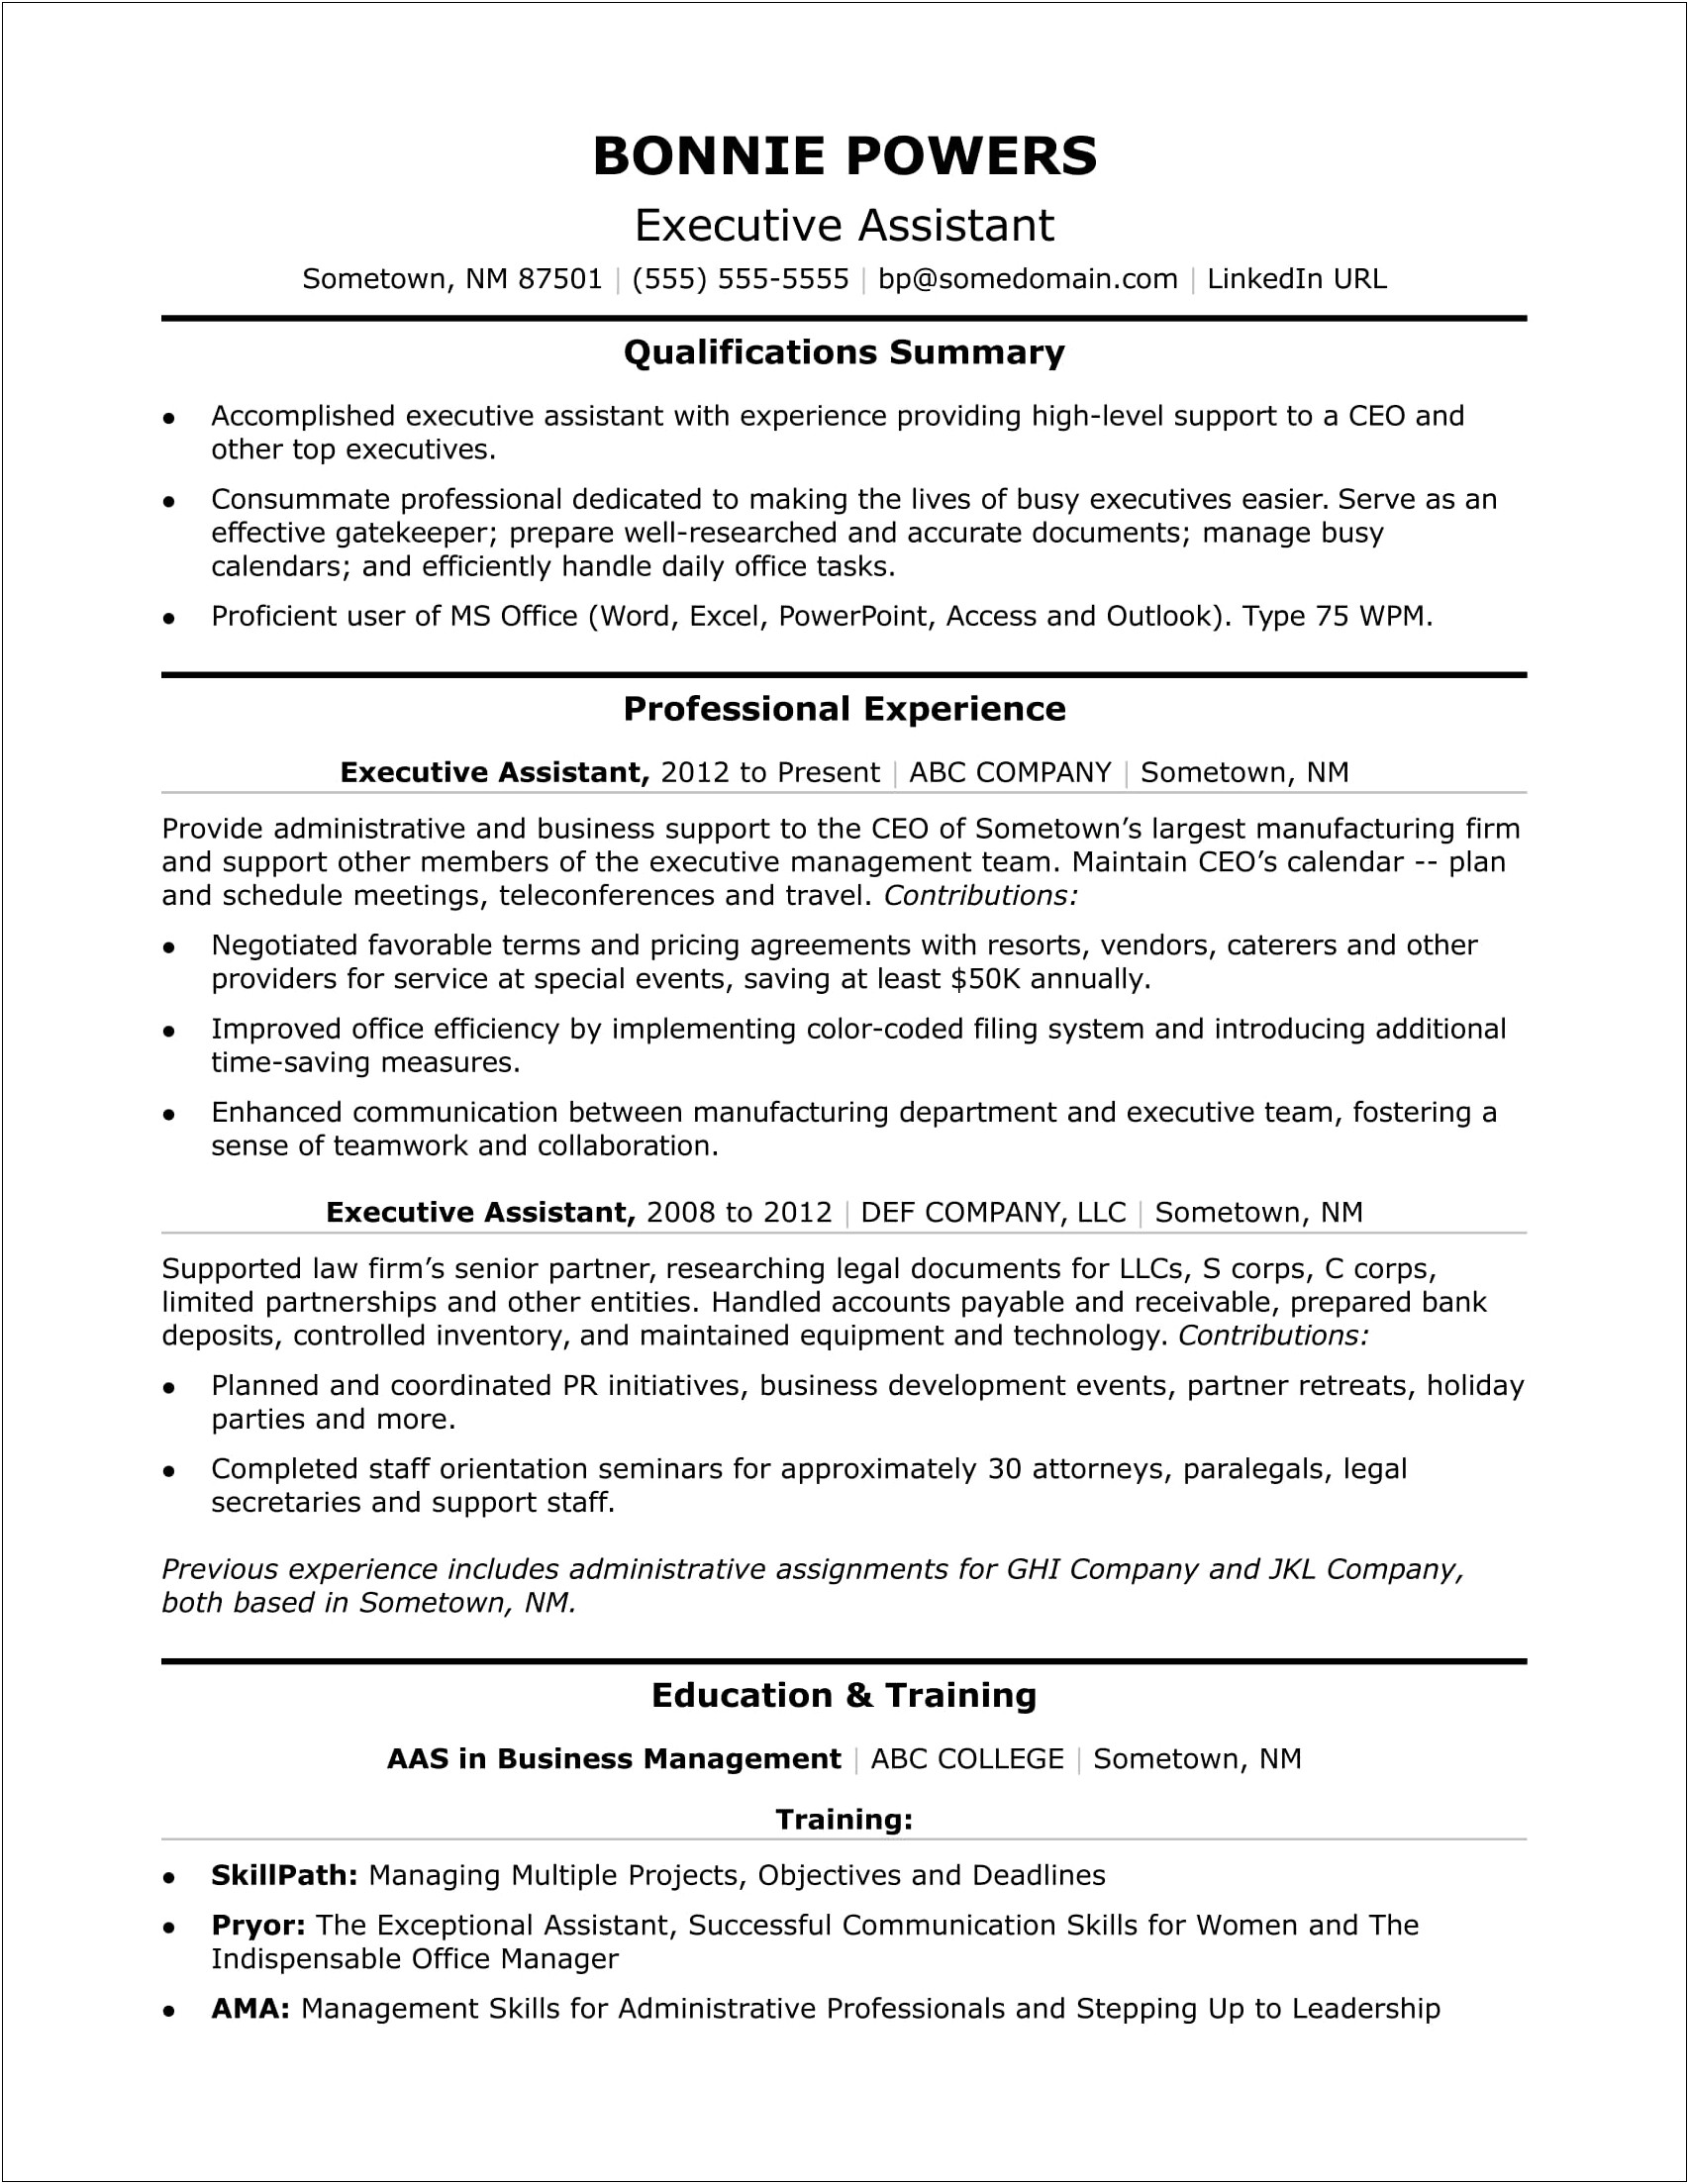 Resume Skills For An Administrative Assistant